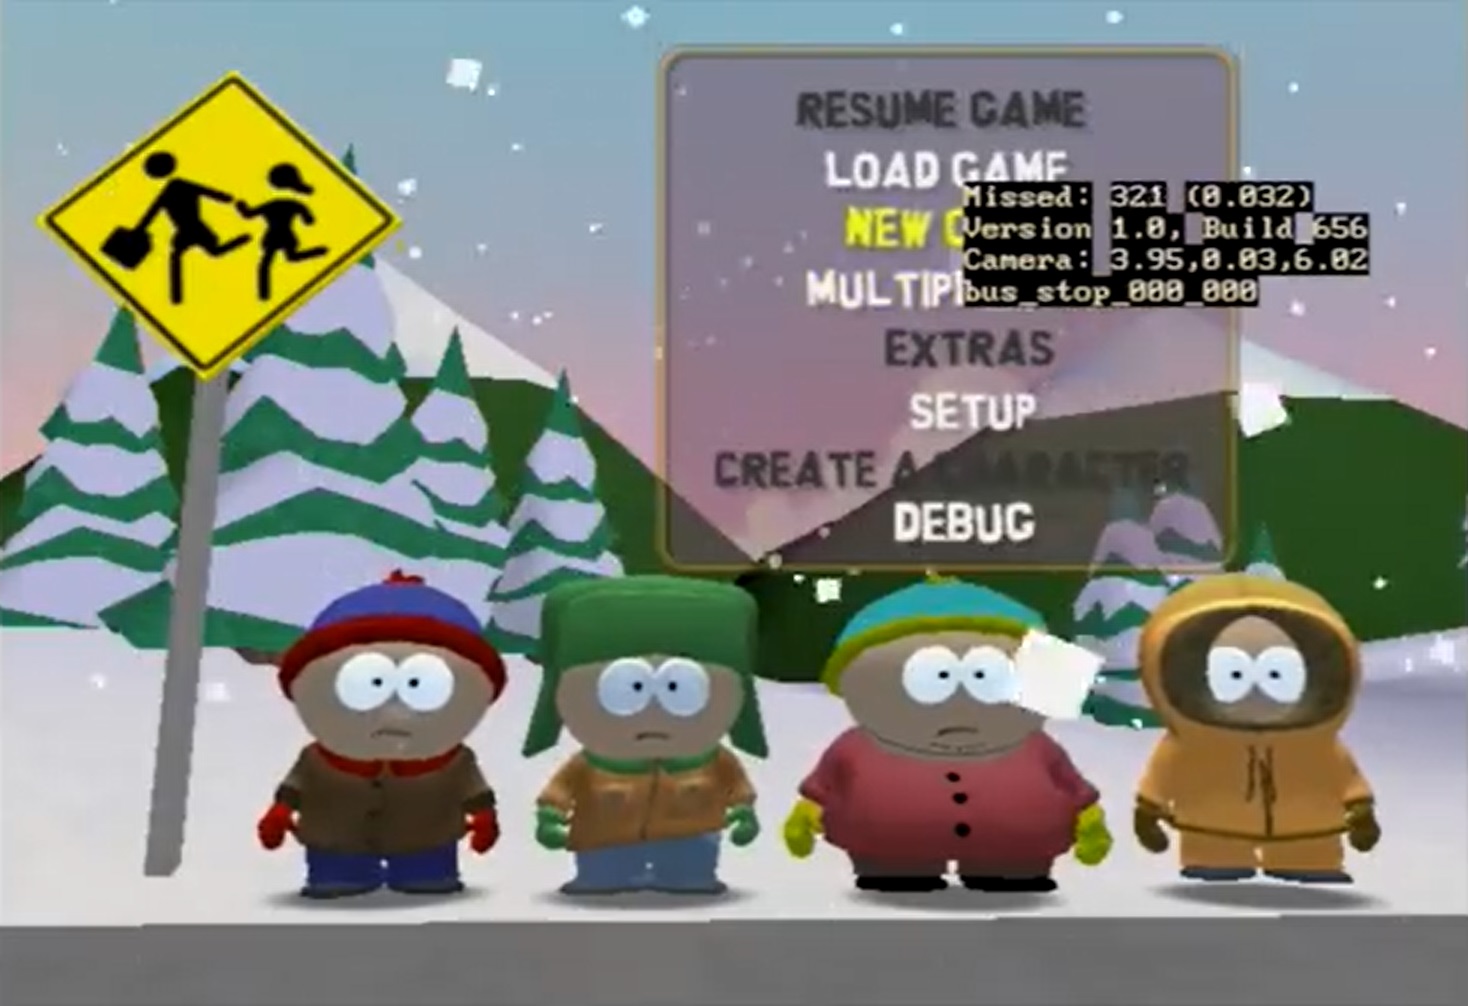 South Park (partially found build of cancelled multiplatform open